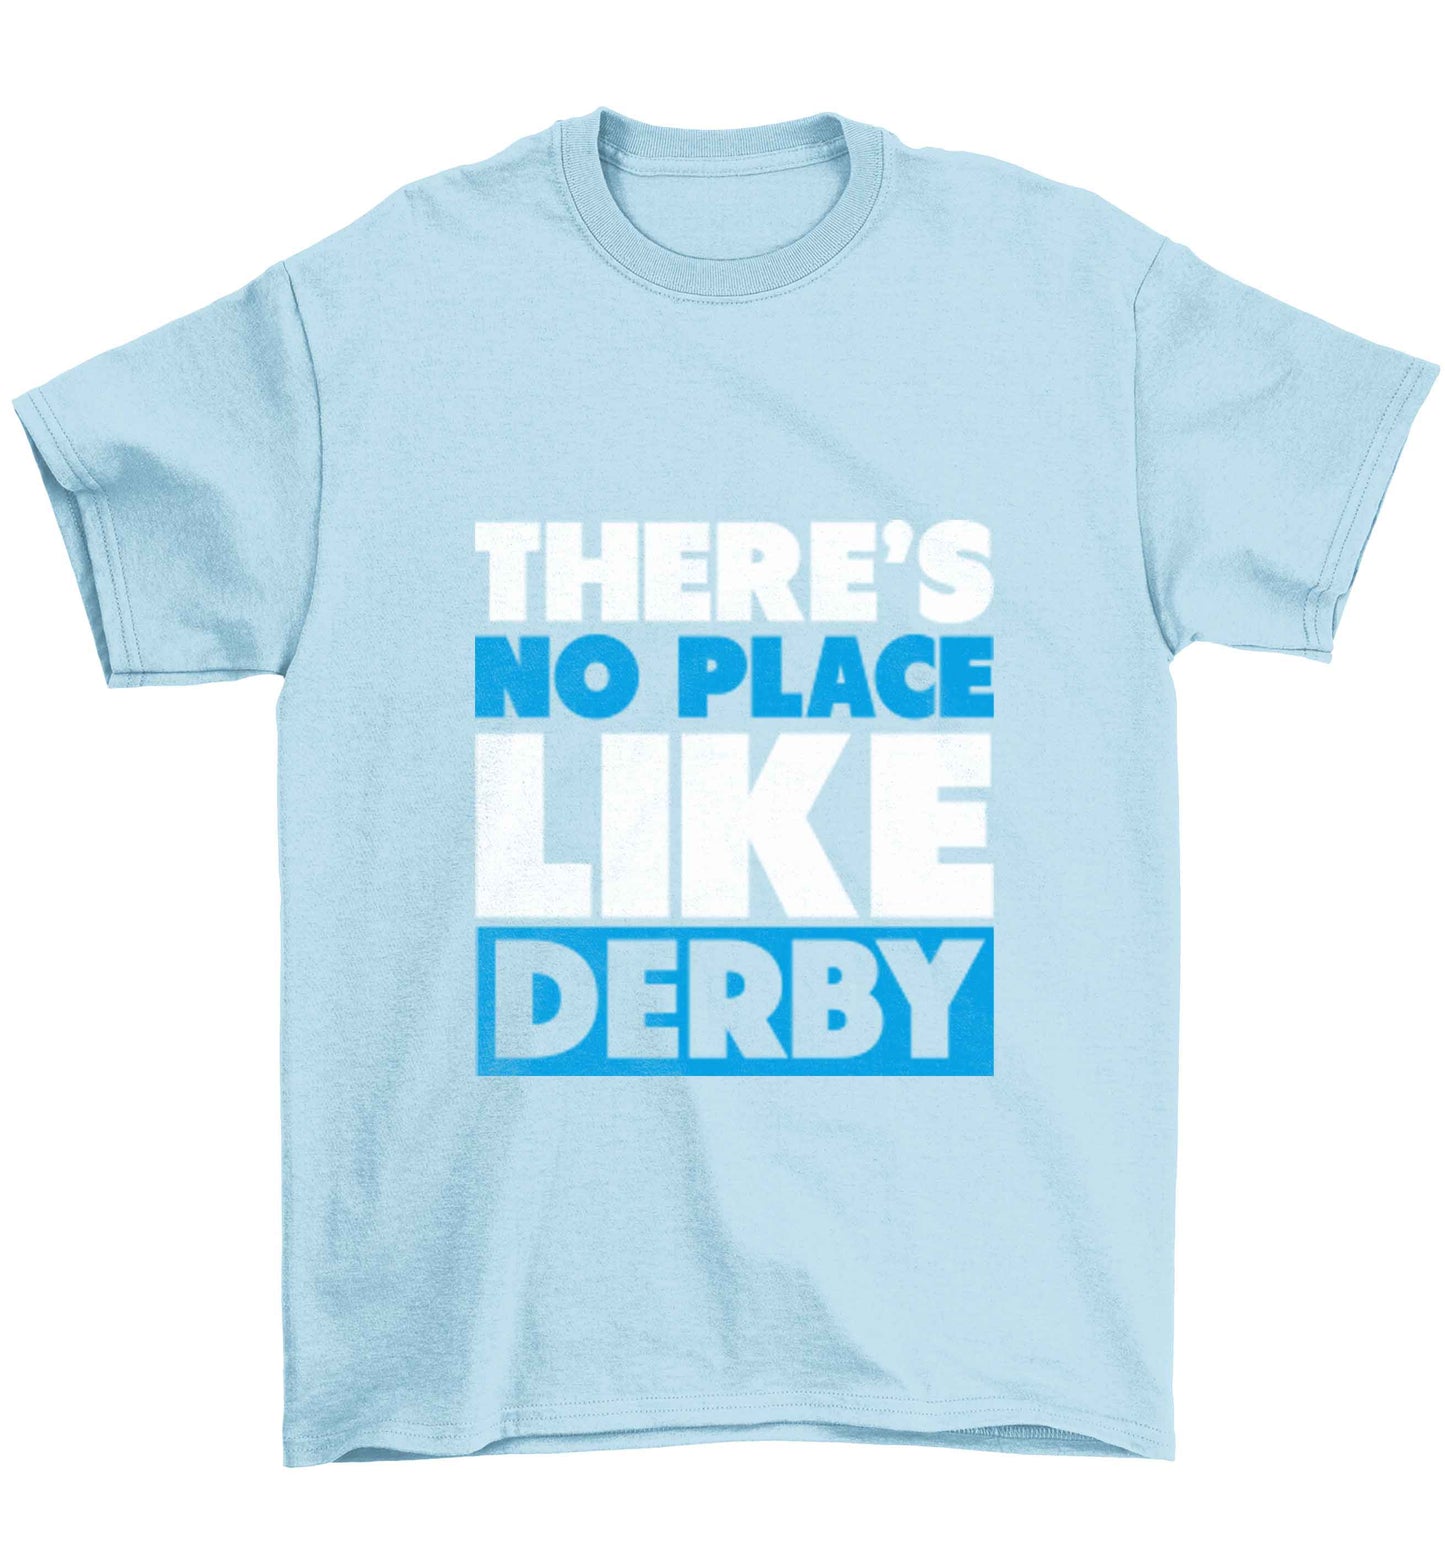 There's no place like Derby Children's light blue Tshirt 12-13 Years